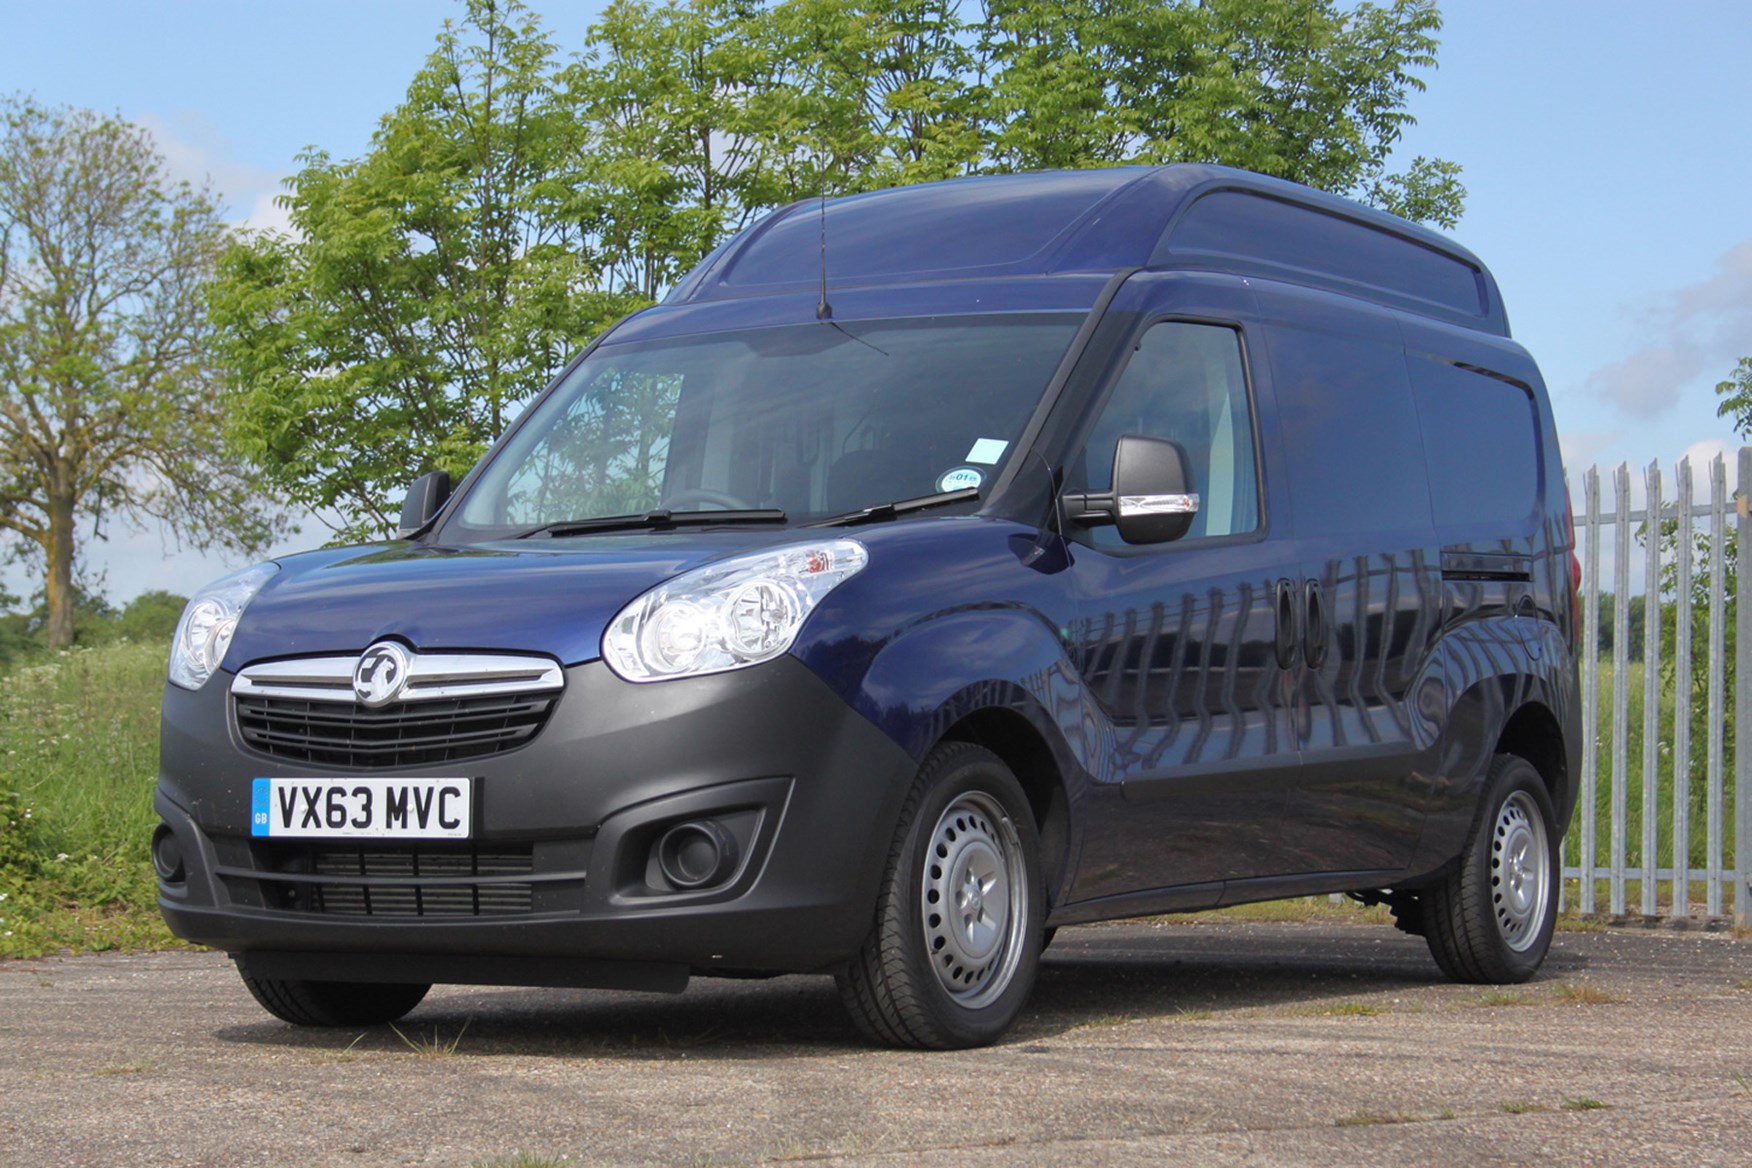 Vauxhall Combo full review on Parkers Vans - exterior